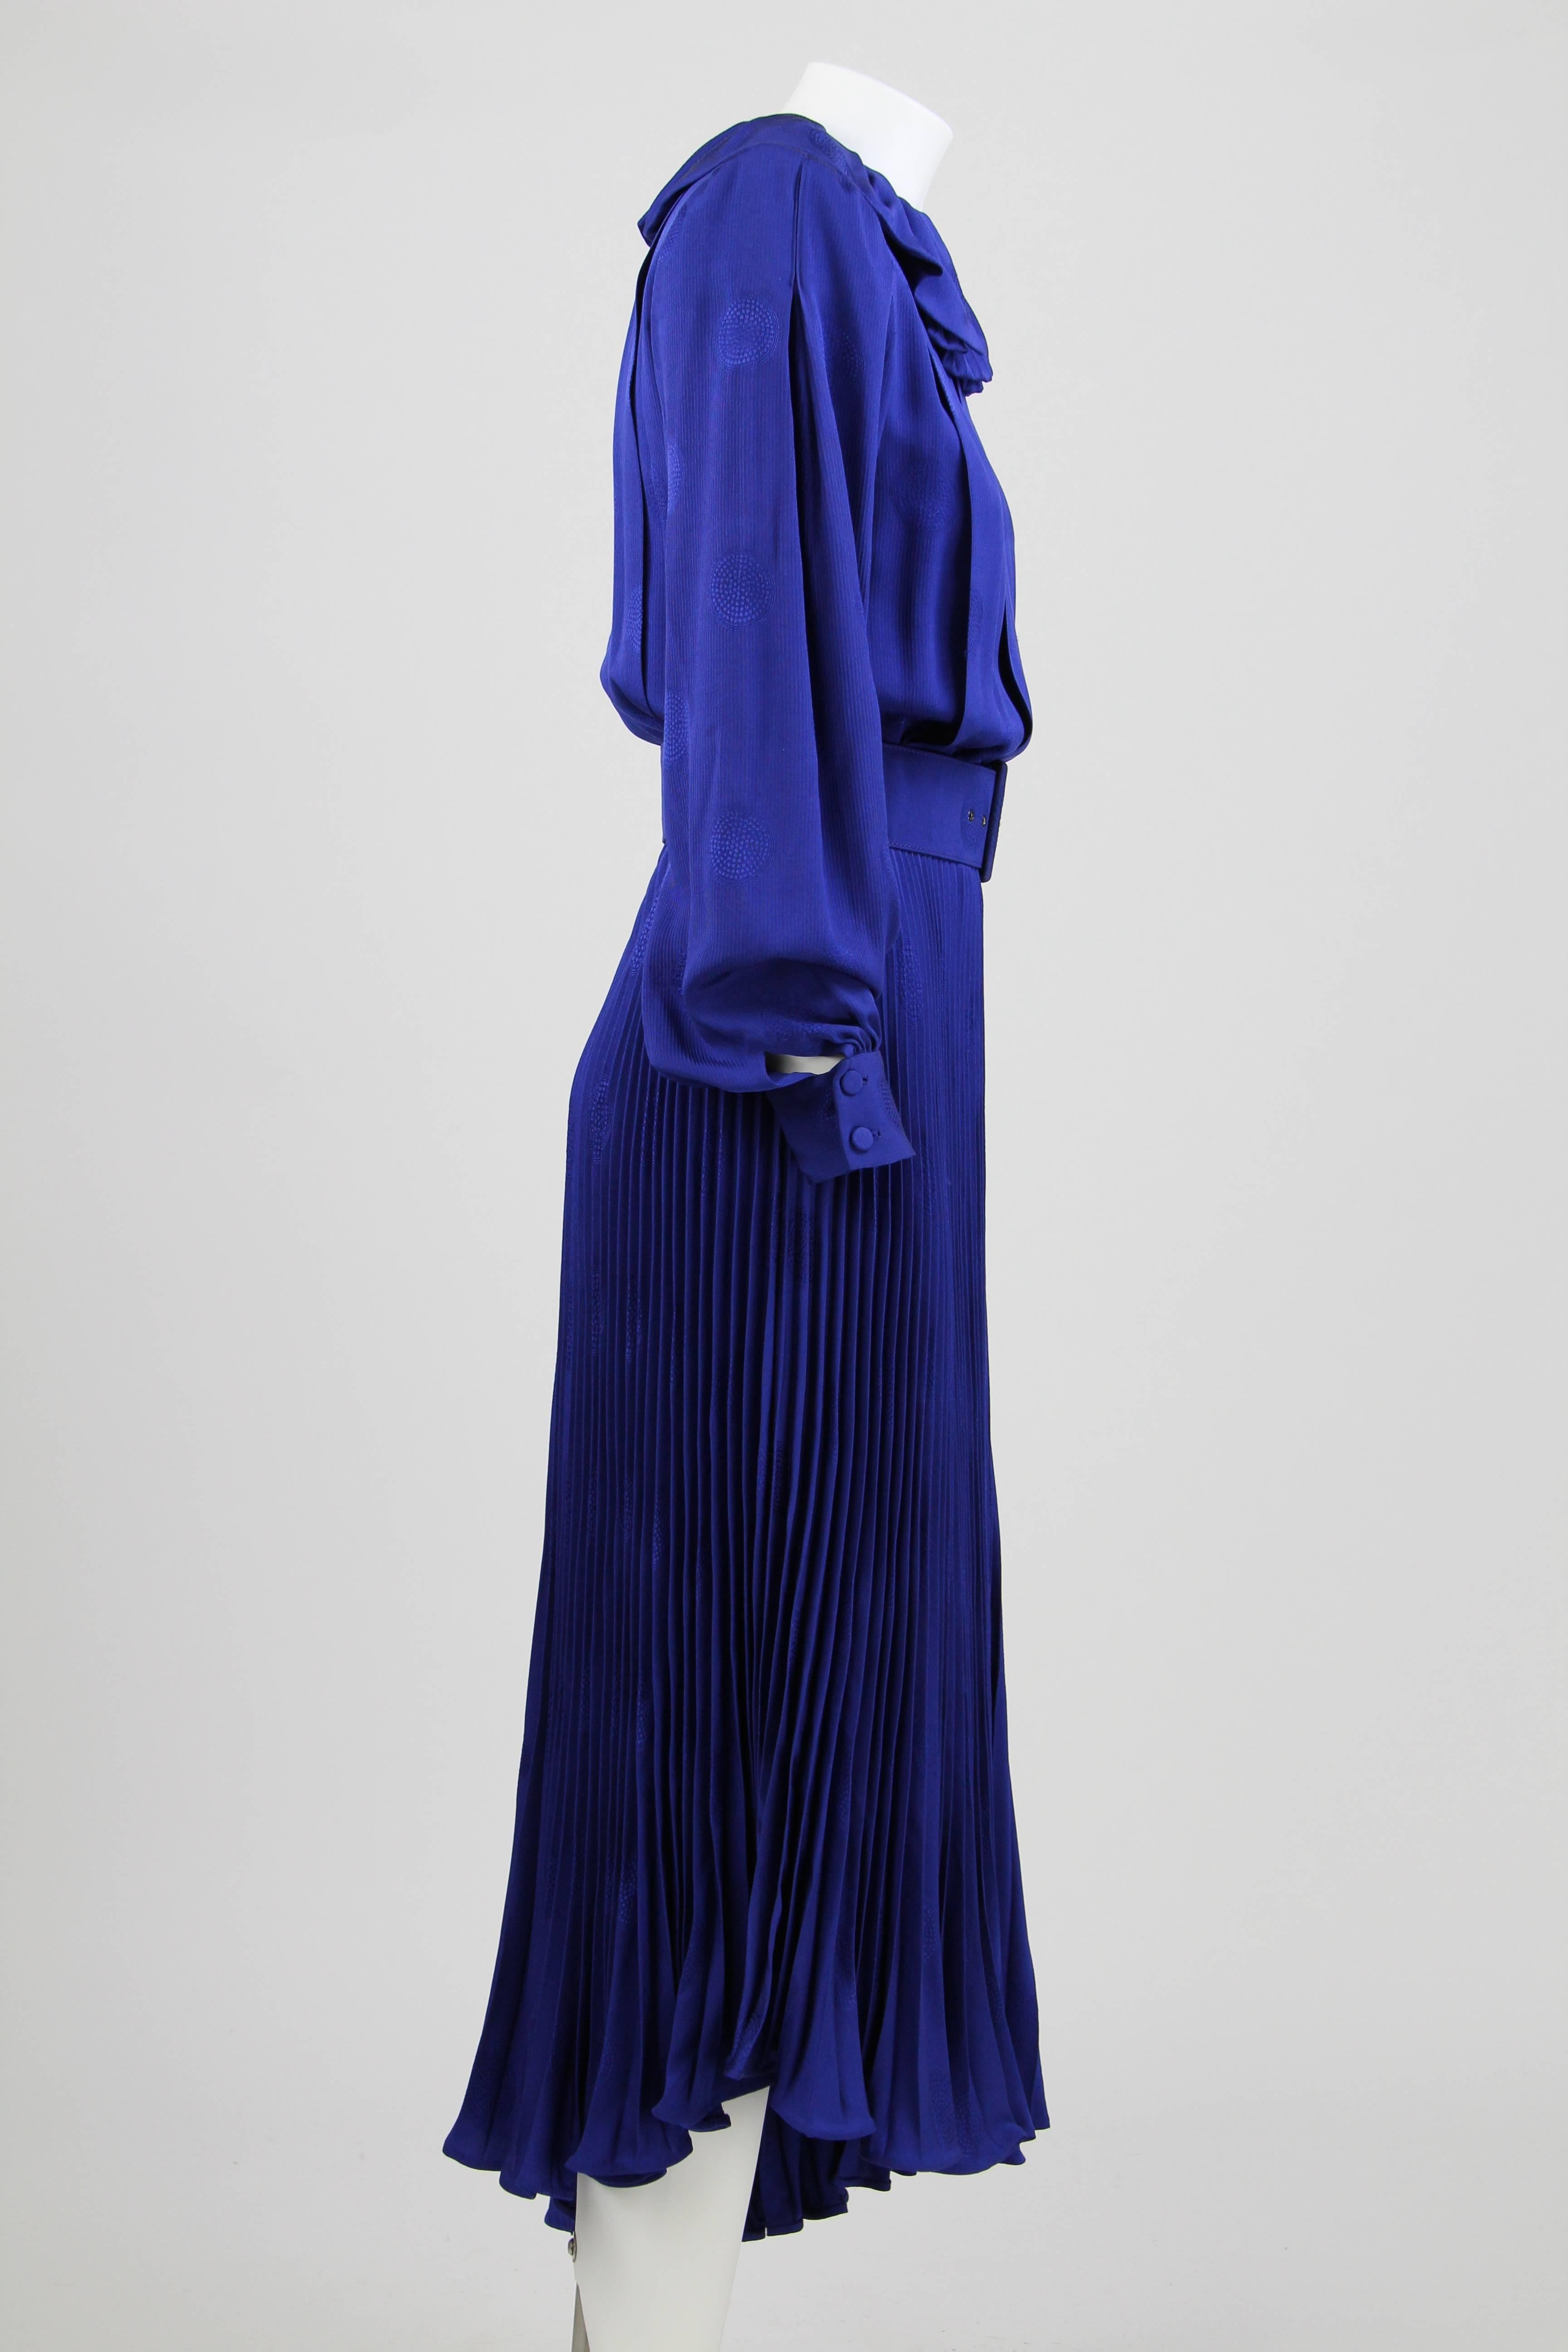 Early 1980s André Laug Blue Silk Draped Dress featuring a wide collar, an asymmetric and plissé skirt and buttoned cuffs. 
This item was designed and made in Italy by the French designer André Laug. It is kept in very good conditions.
Size 40 IT.